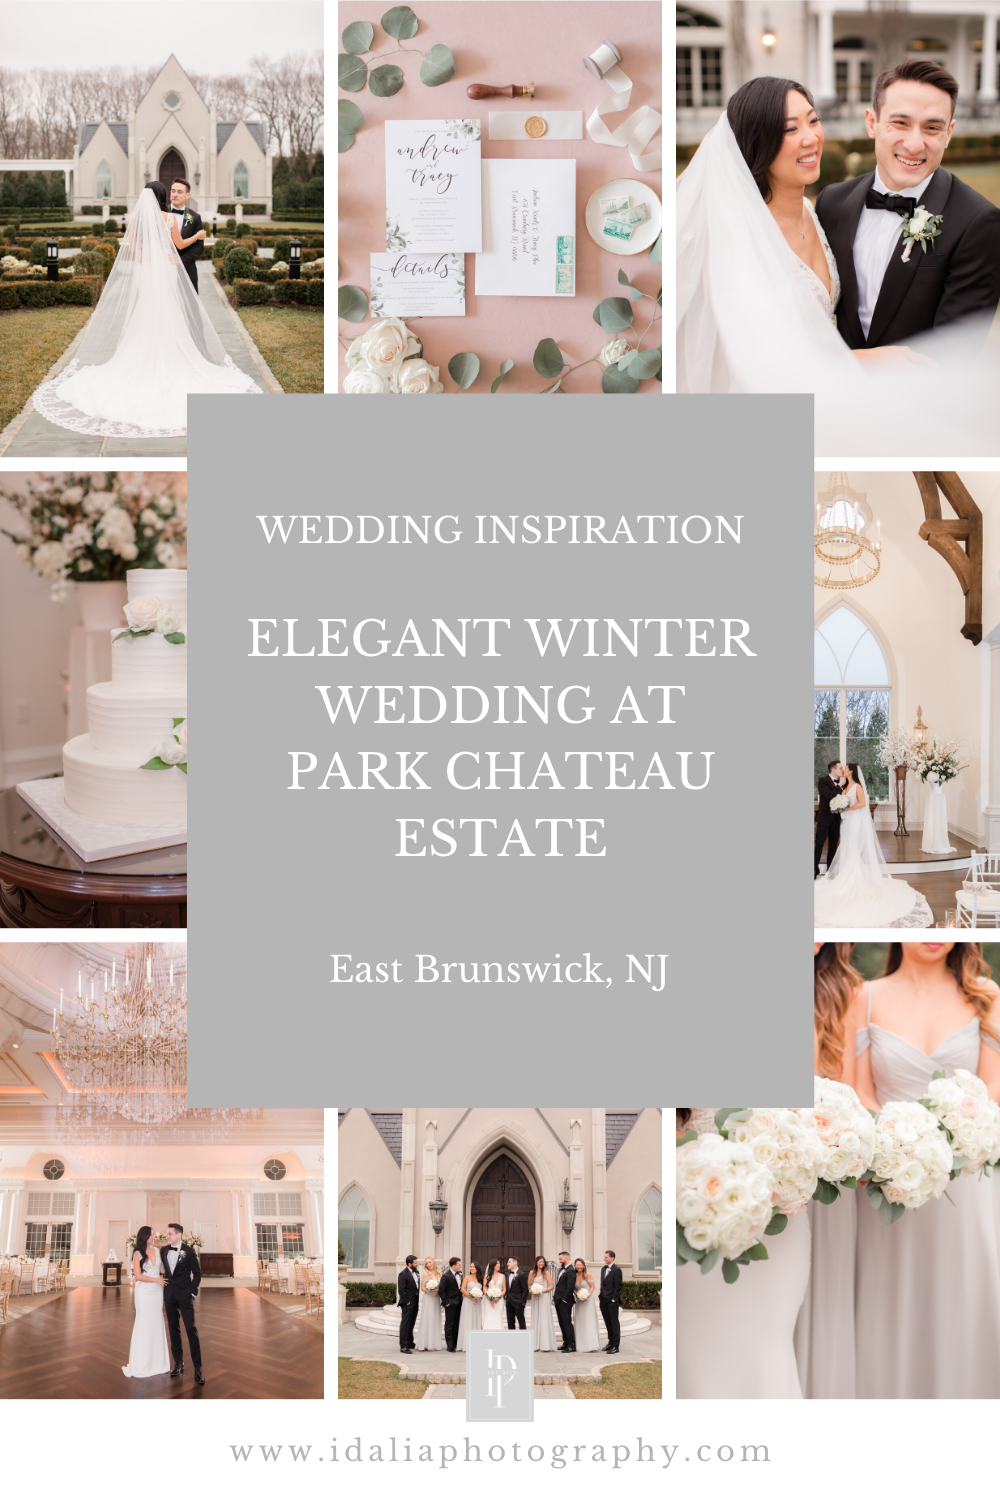 Wedding Inspiration for a Winter wedding at Park Chateau Estate by Idalia Photography